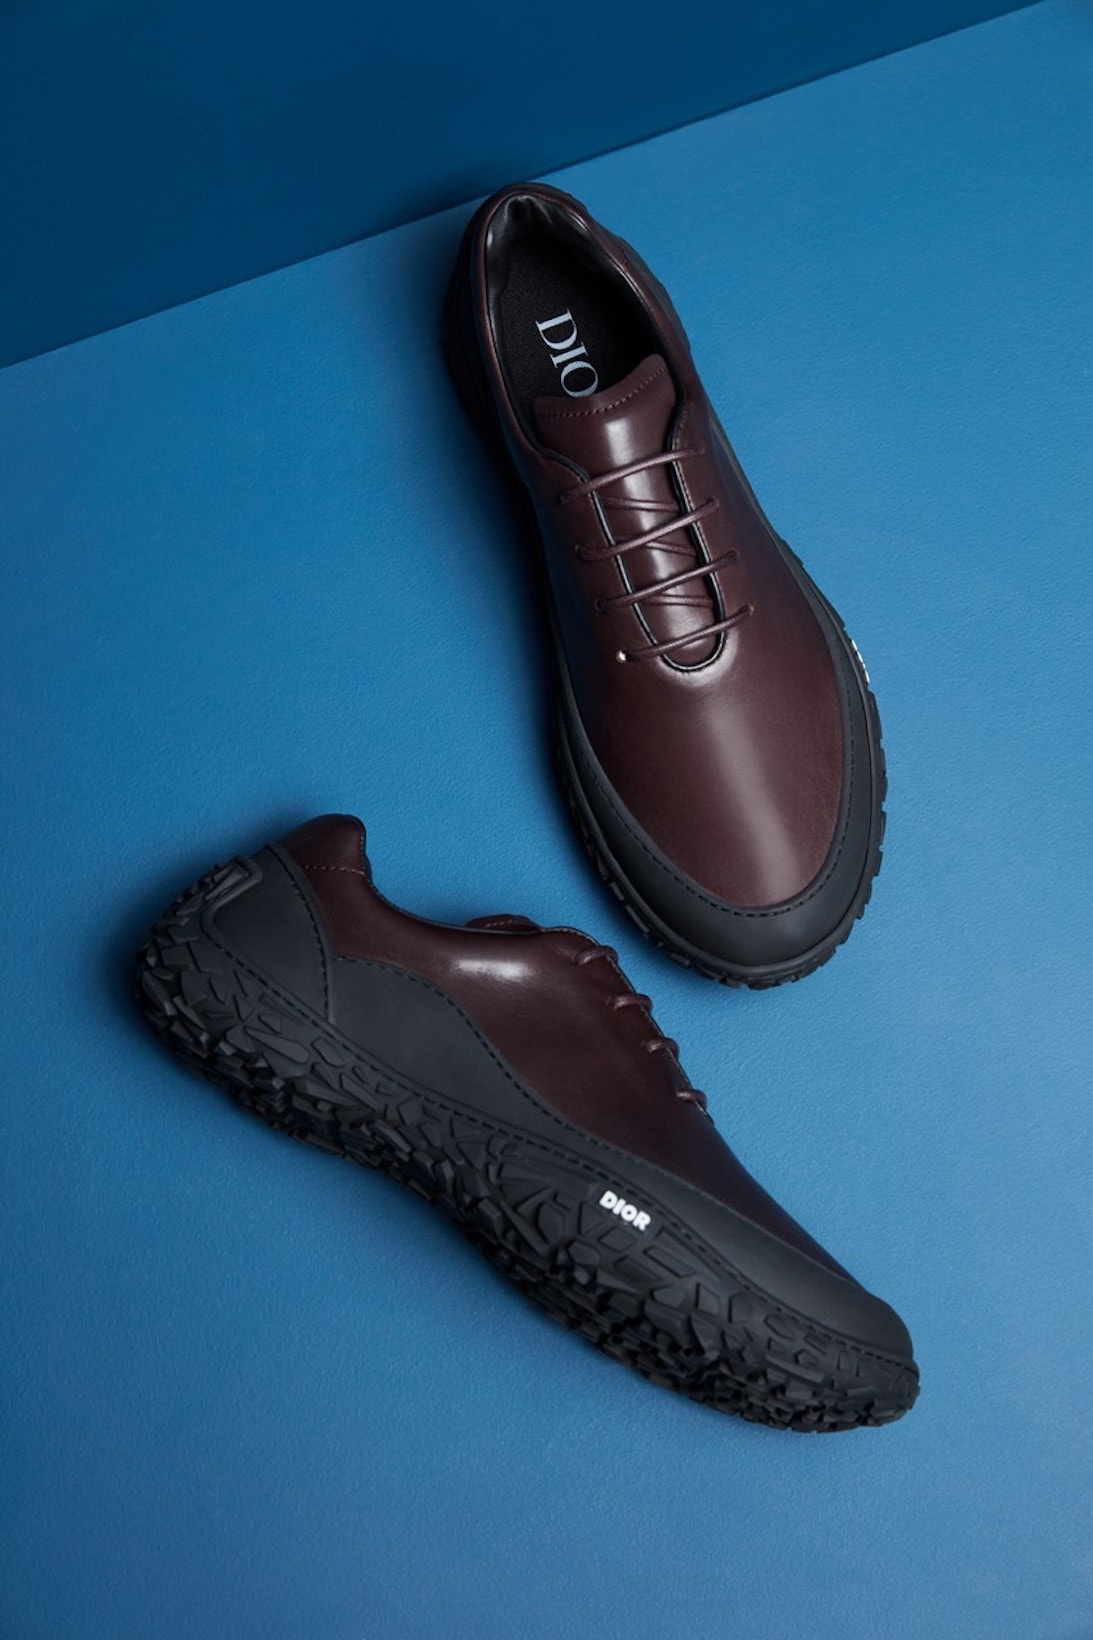 dior fall winter collection shoes footwear lateral top view maroon black